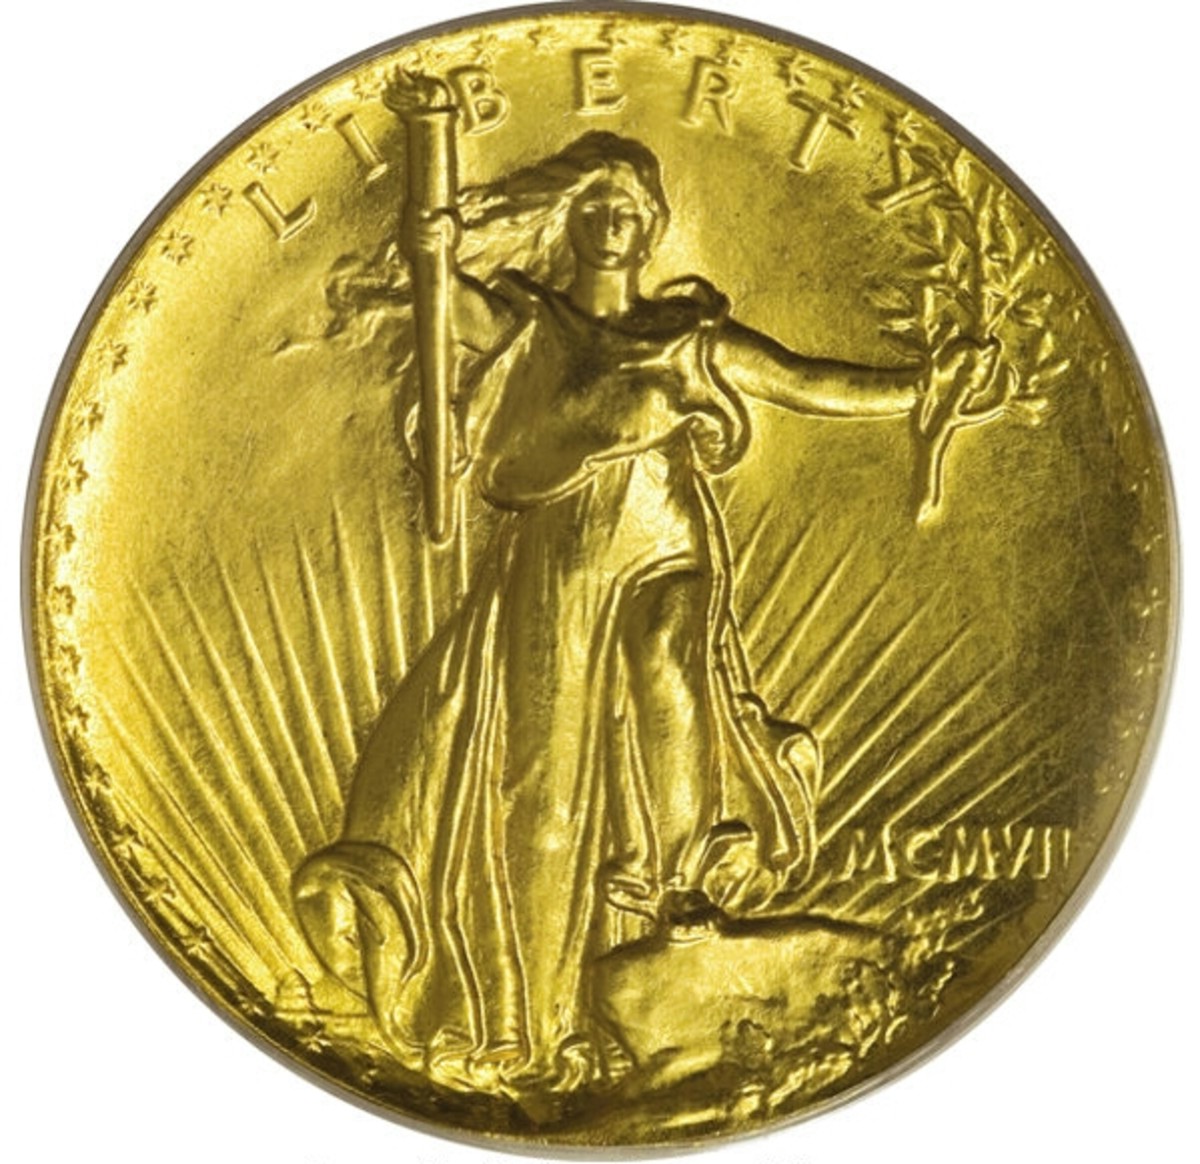 One of the most stunning coins ever minted is the 1907 ultra high relief Saint-Gaudens double eagle. (Image courtesy Heritage Auctions.)